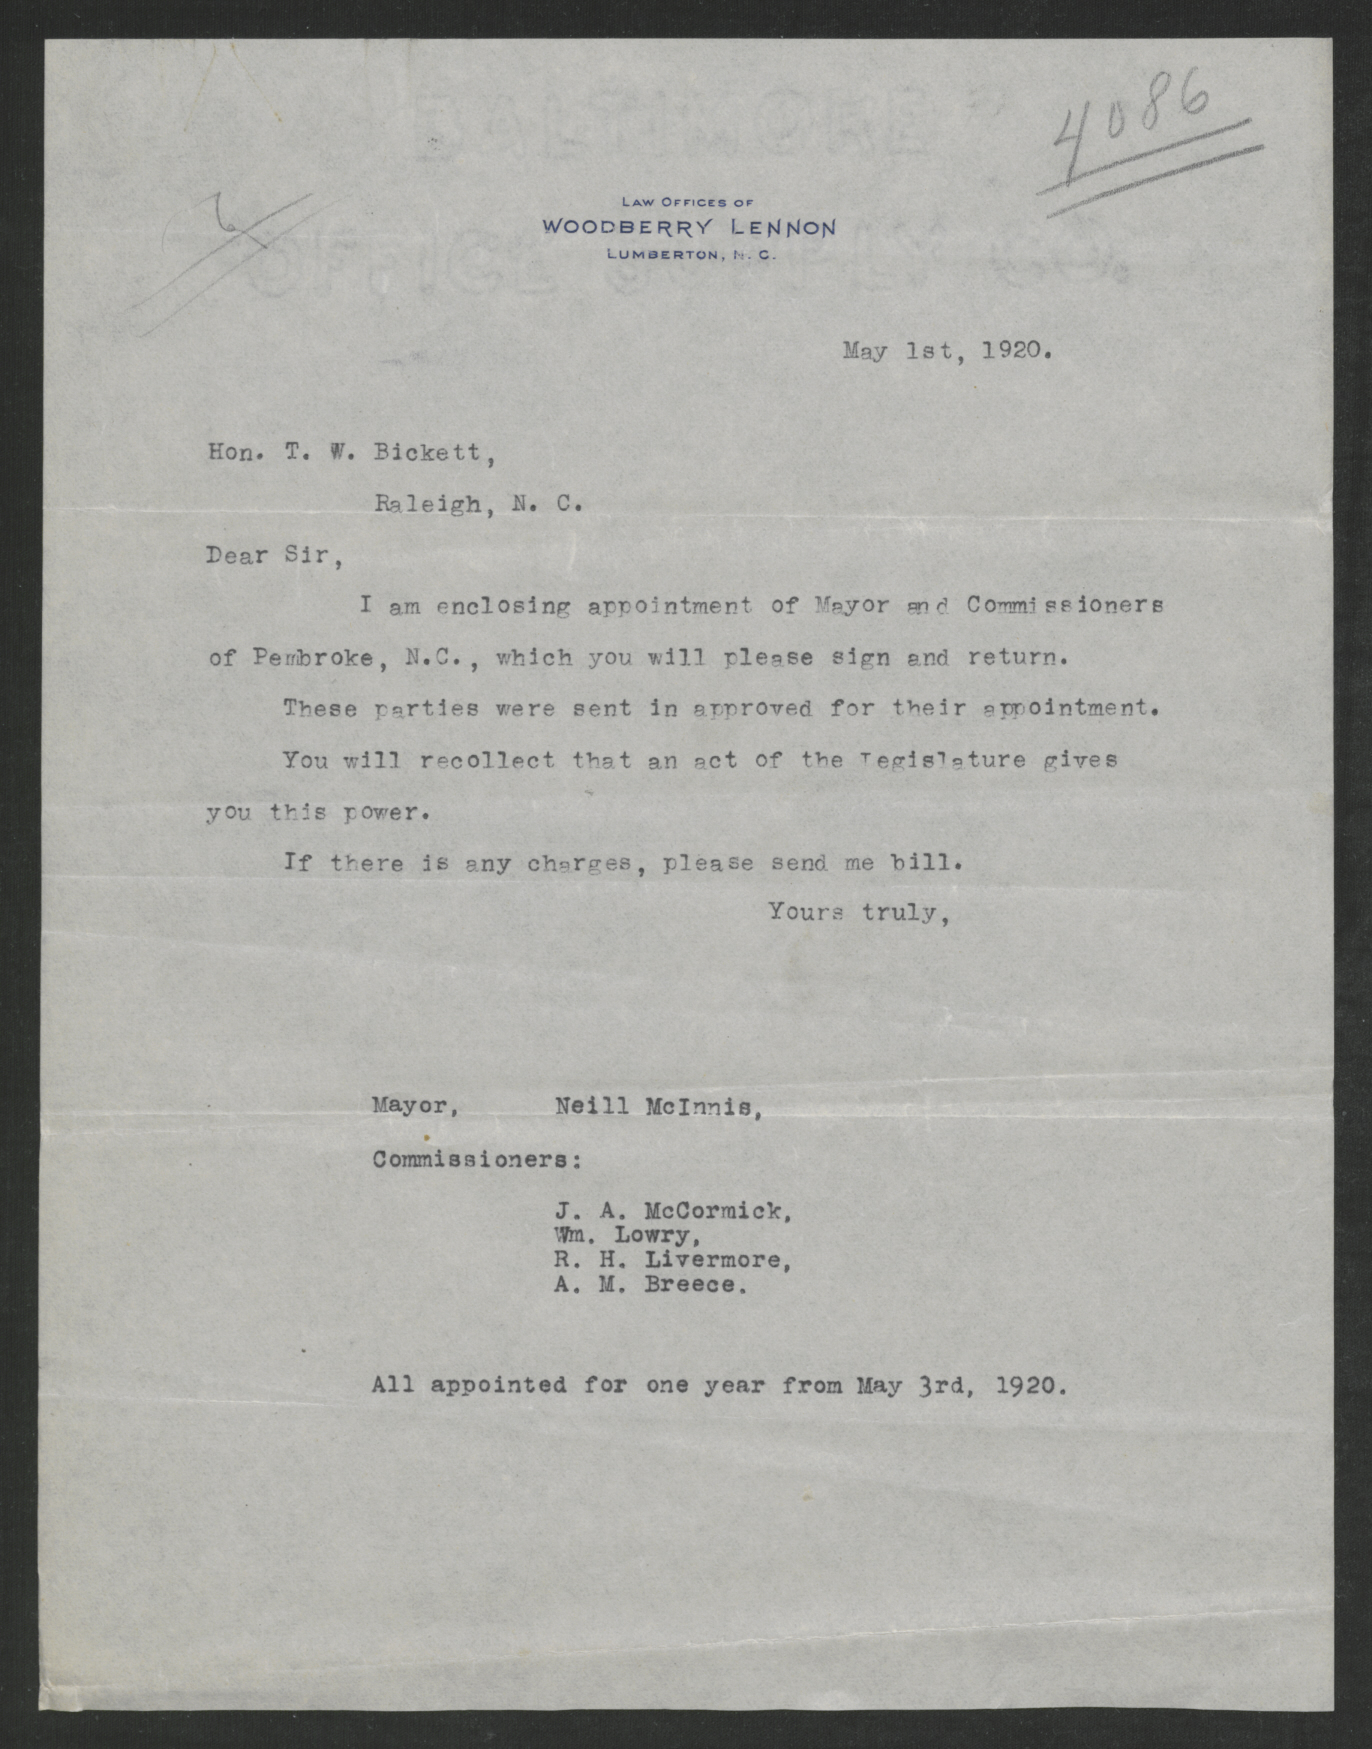 Letter from Neill McInnis to Thomas W. Bickett, May 1, 1920